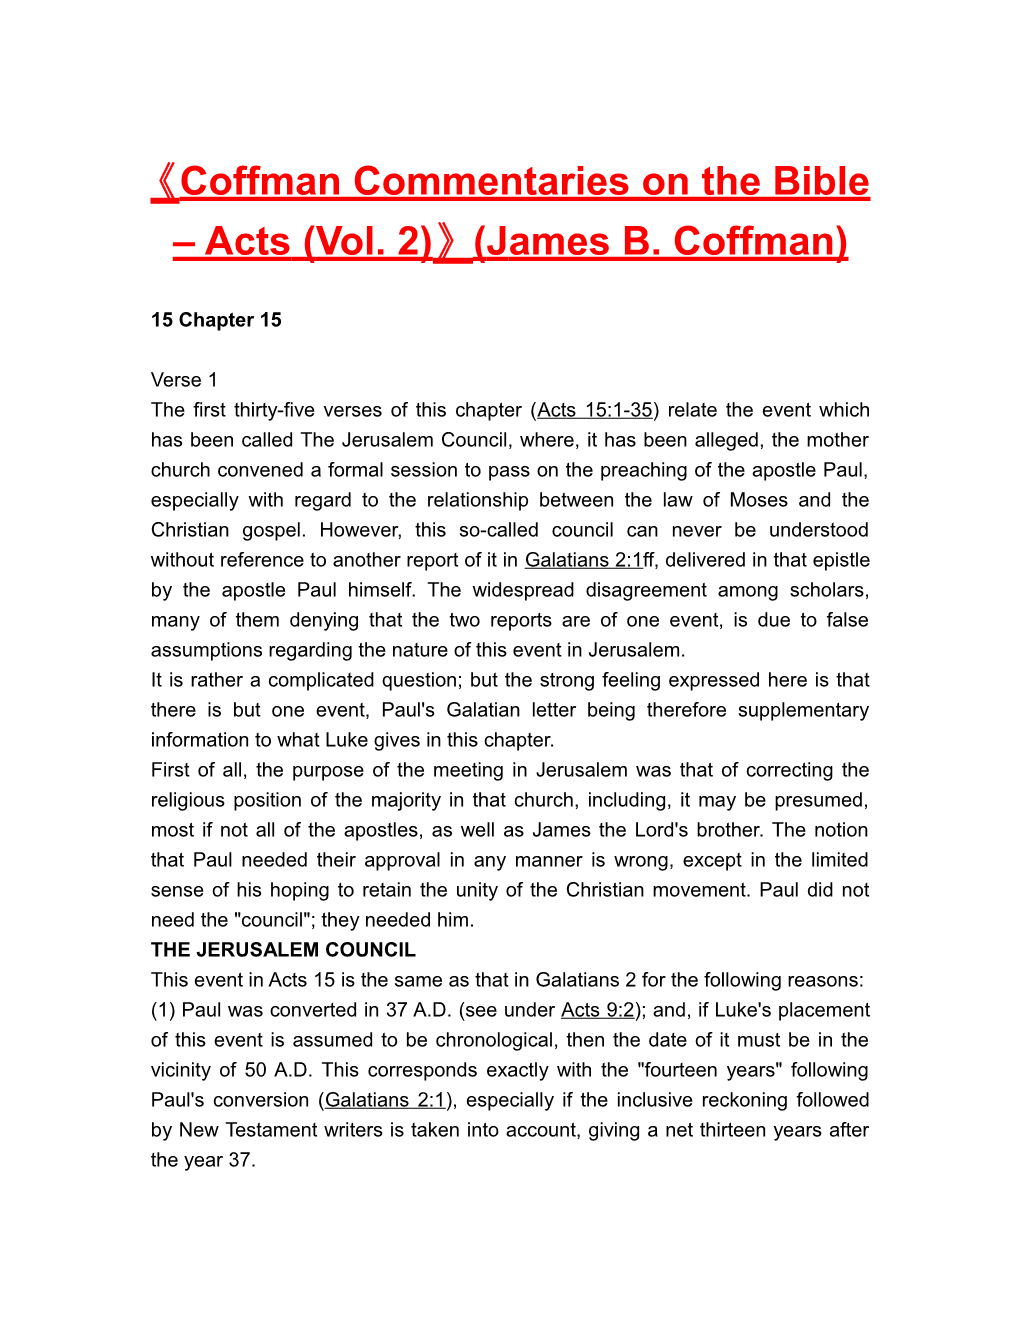 Coffman Commentaries on the Bible Acts (Vol. 2) (James B. Coffman)